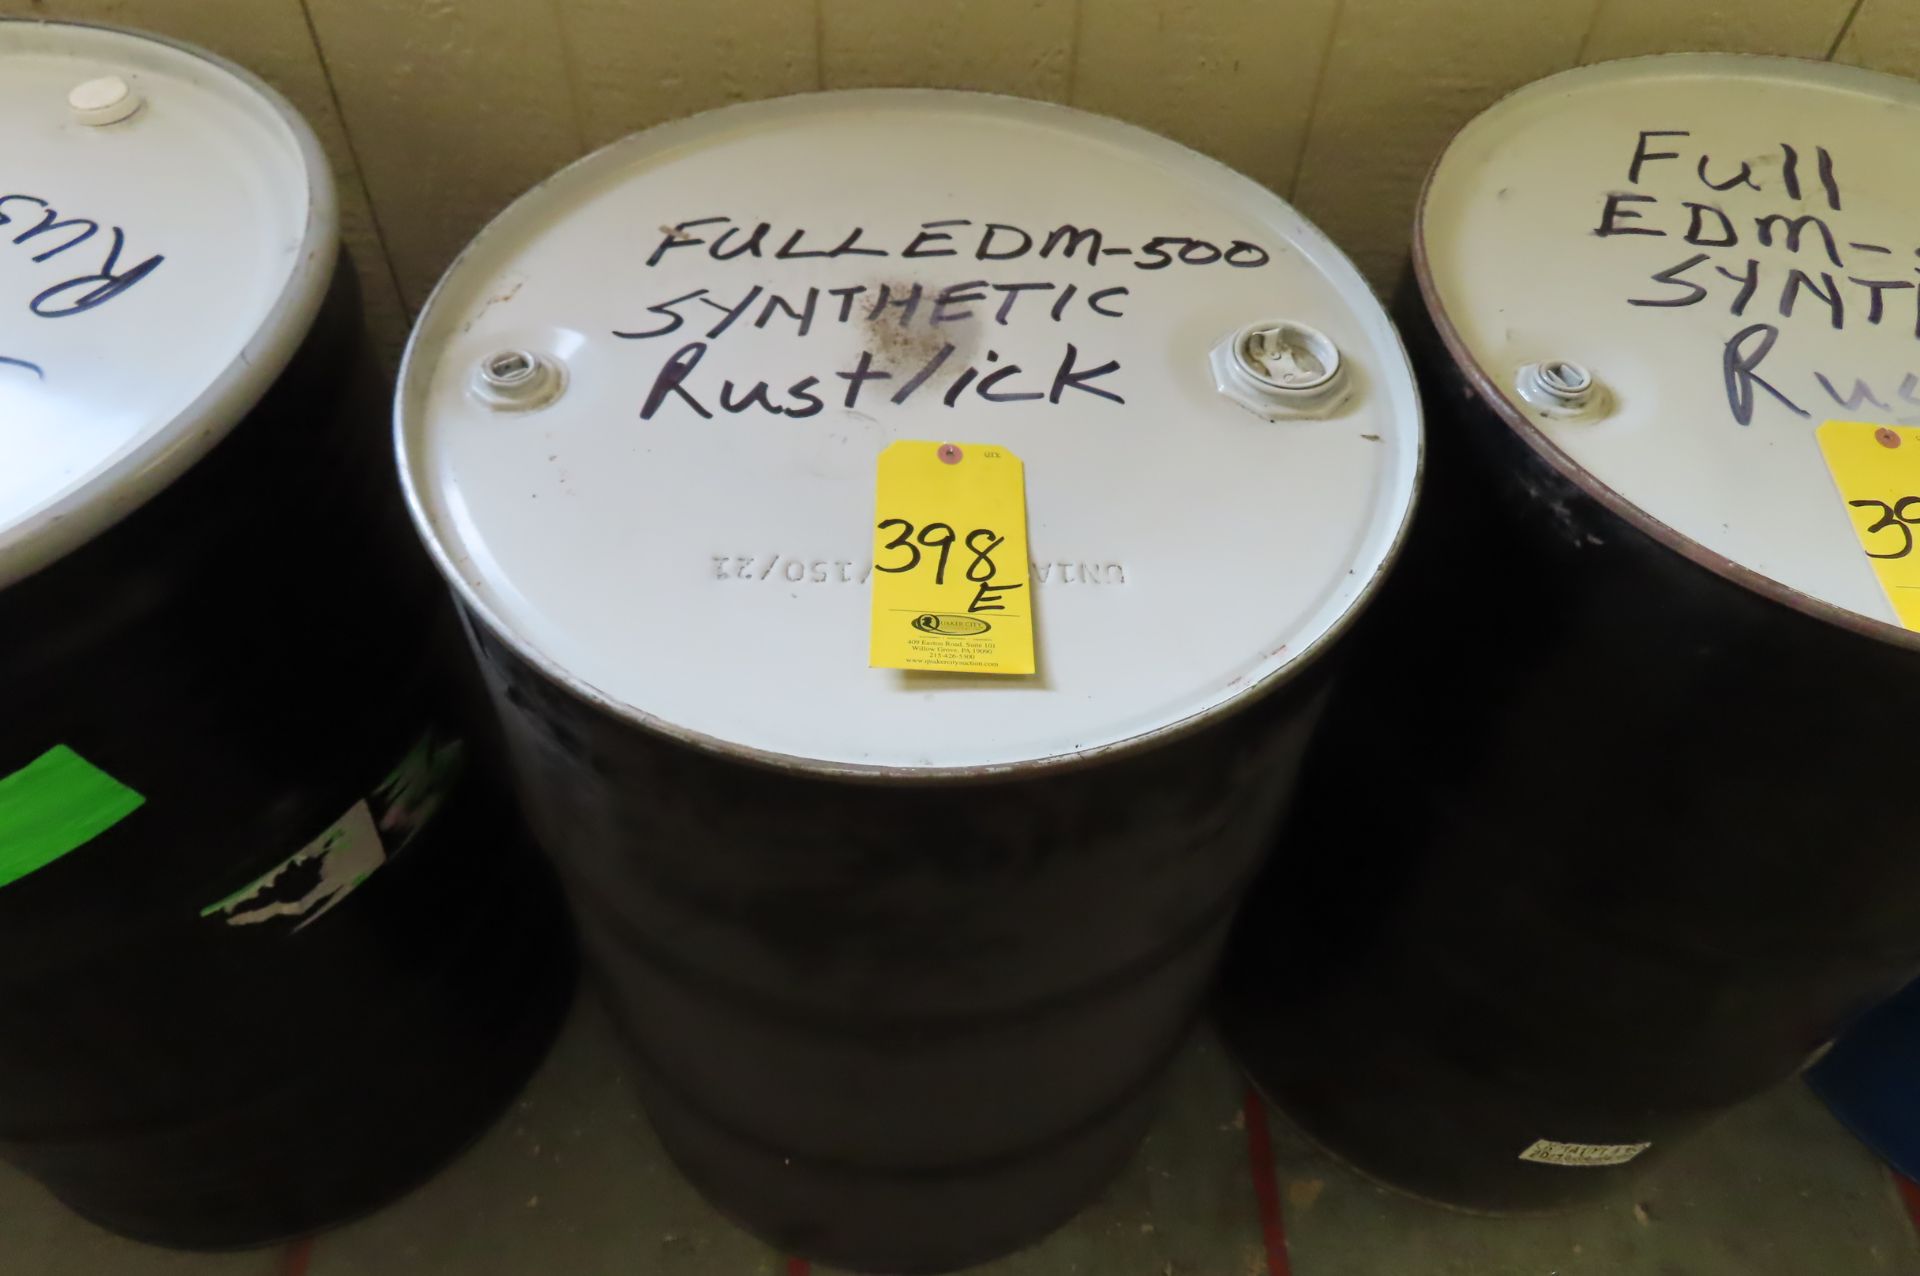 55 GALLON DRUM OF USED DIELECTRIC FLUID IN SEALED DRUM